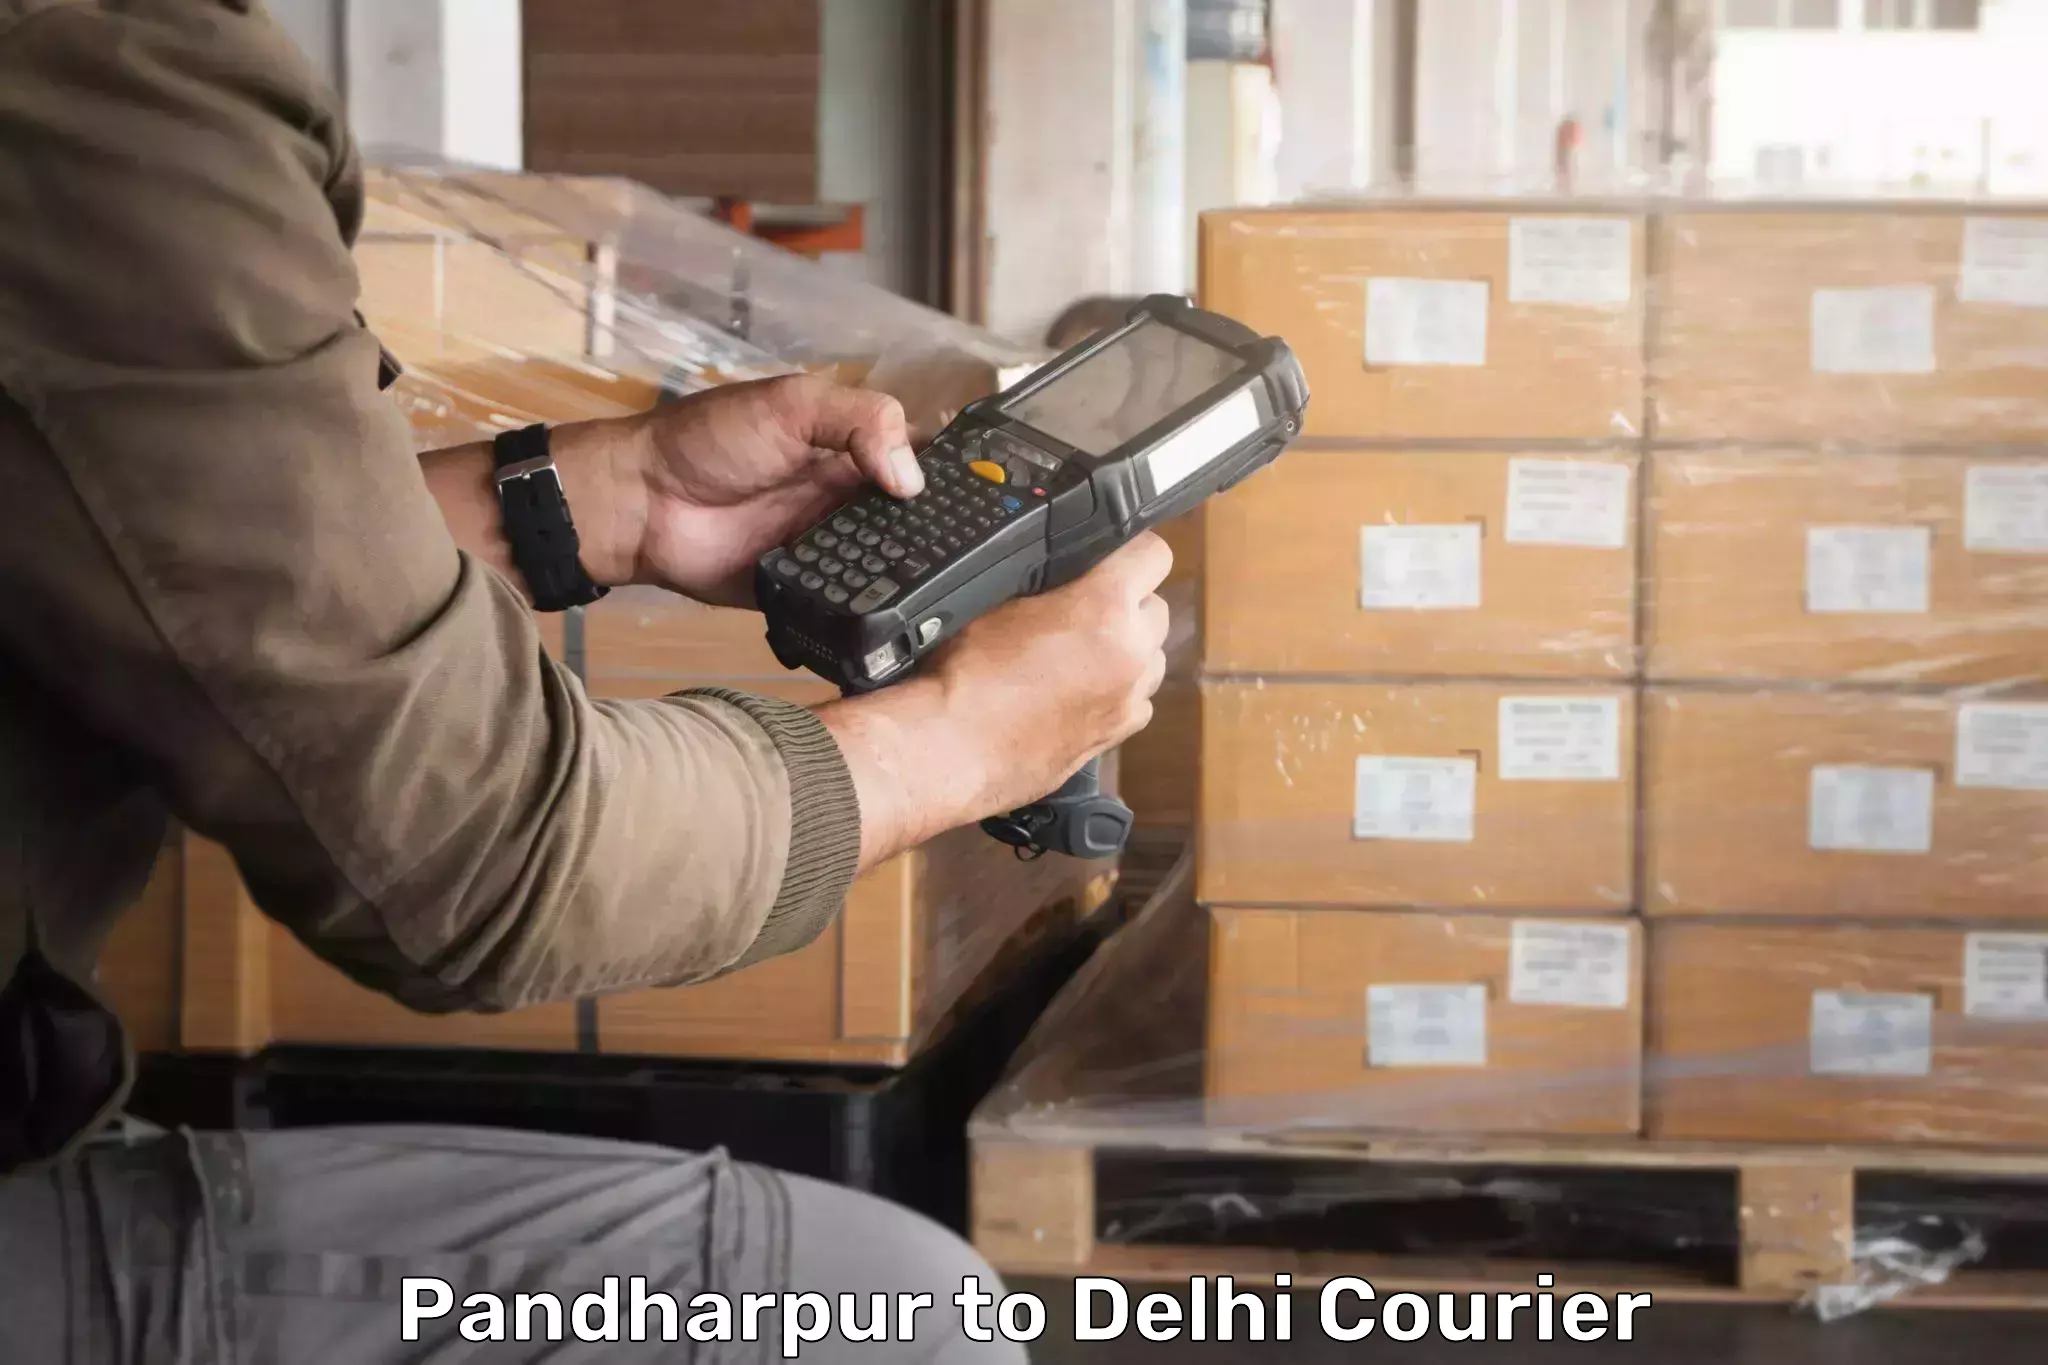 Multi-national courier services Pandharpur to NCR